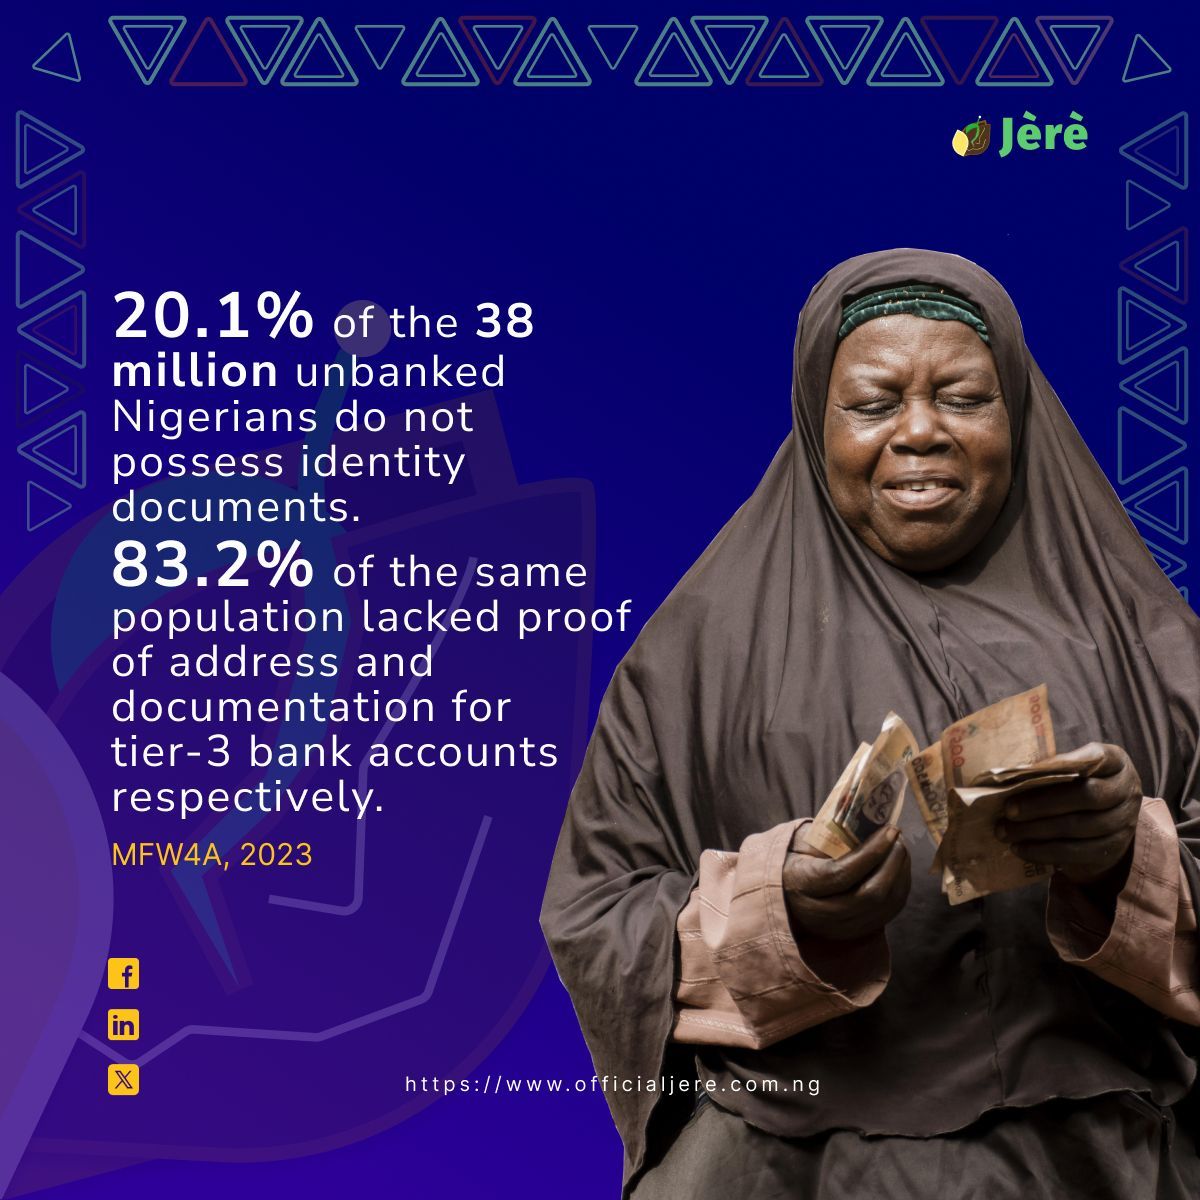 🌾💼 Banking the Unbanked Farmers: Join #JereAgtech in revolutionizing financial inclusion for smallholder farmers in Nigeria. 💰🚜 Empowering growth, one digital transaction at a time. #FinancialInclusion #BankingTheUnbanked #AgTech 🌱✨